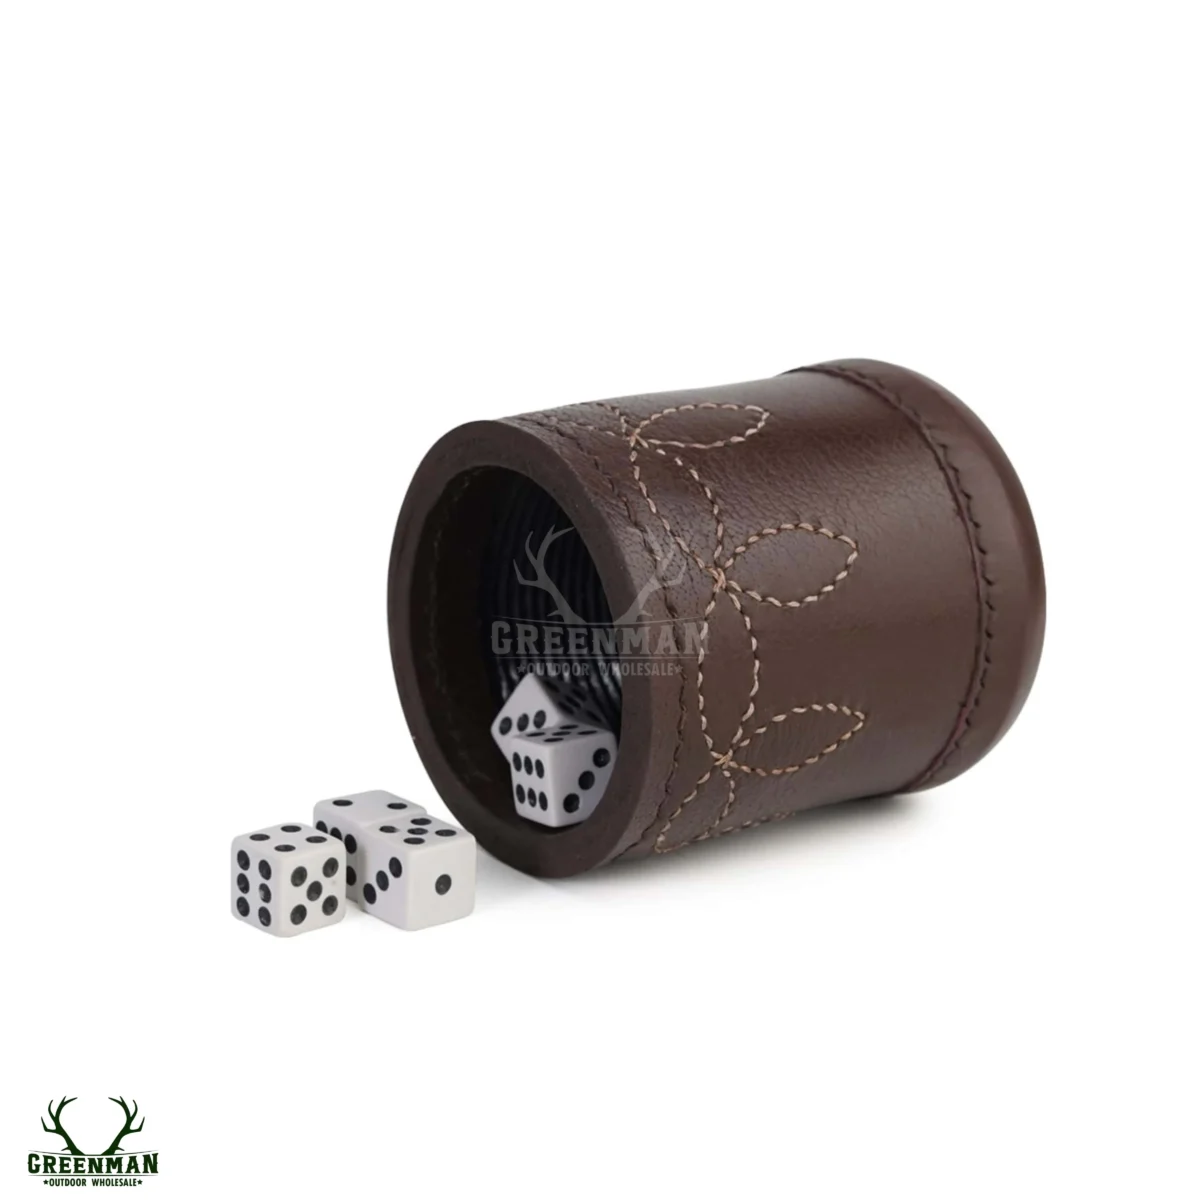 leather dice cup, backgammon leather dice cup